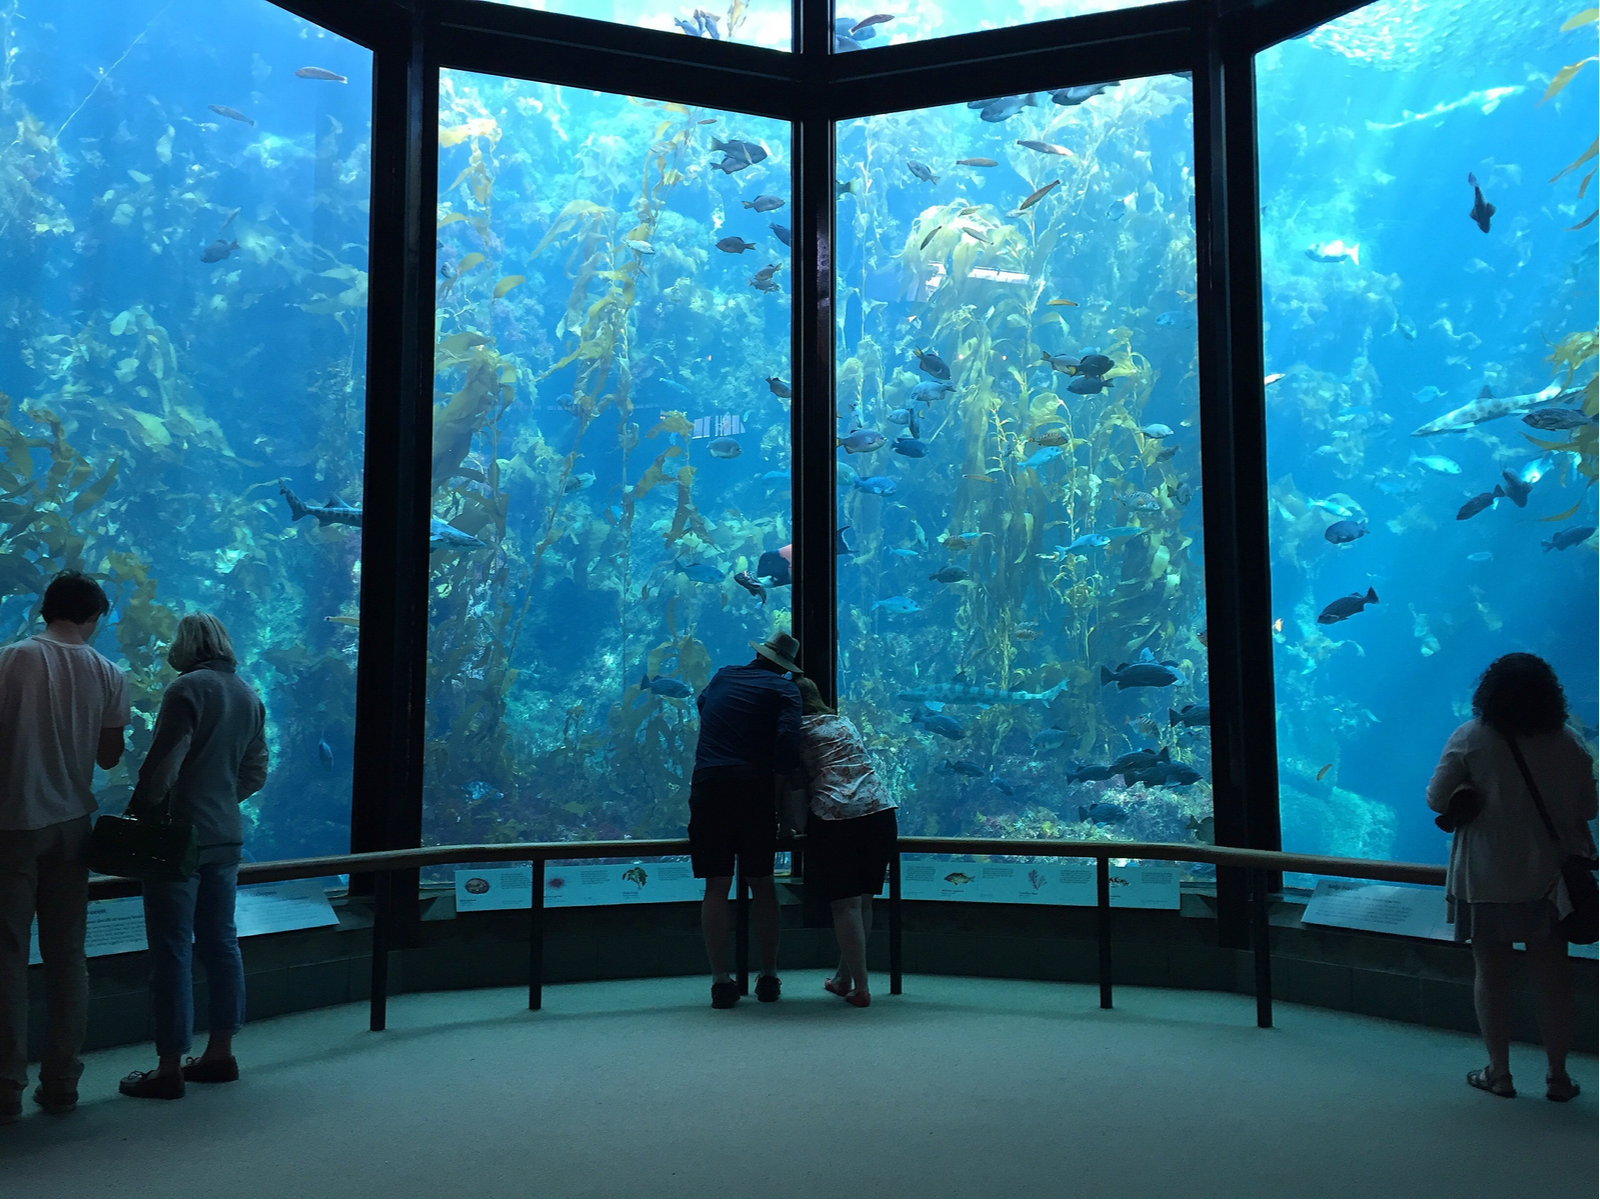 Visitors view the Monterey Bay Aquarium, one of the best aquariums in the United States, pictured in the day